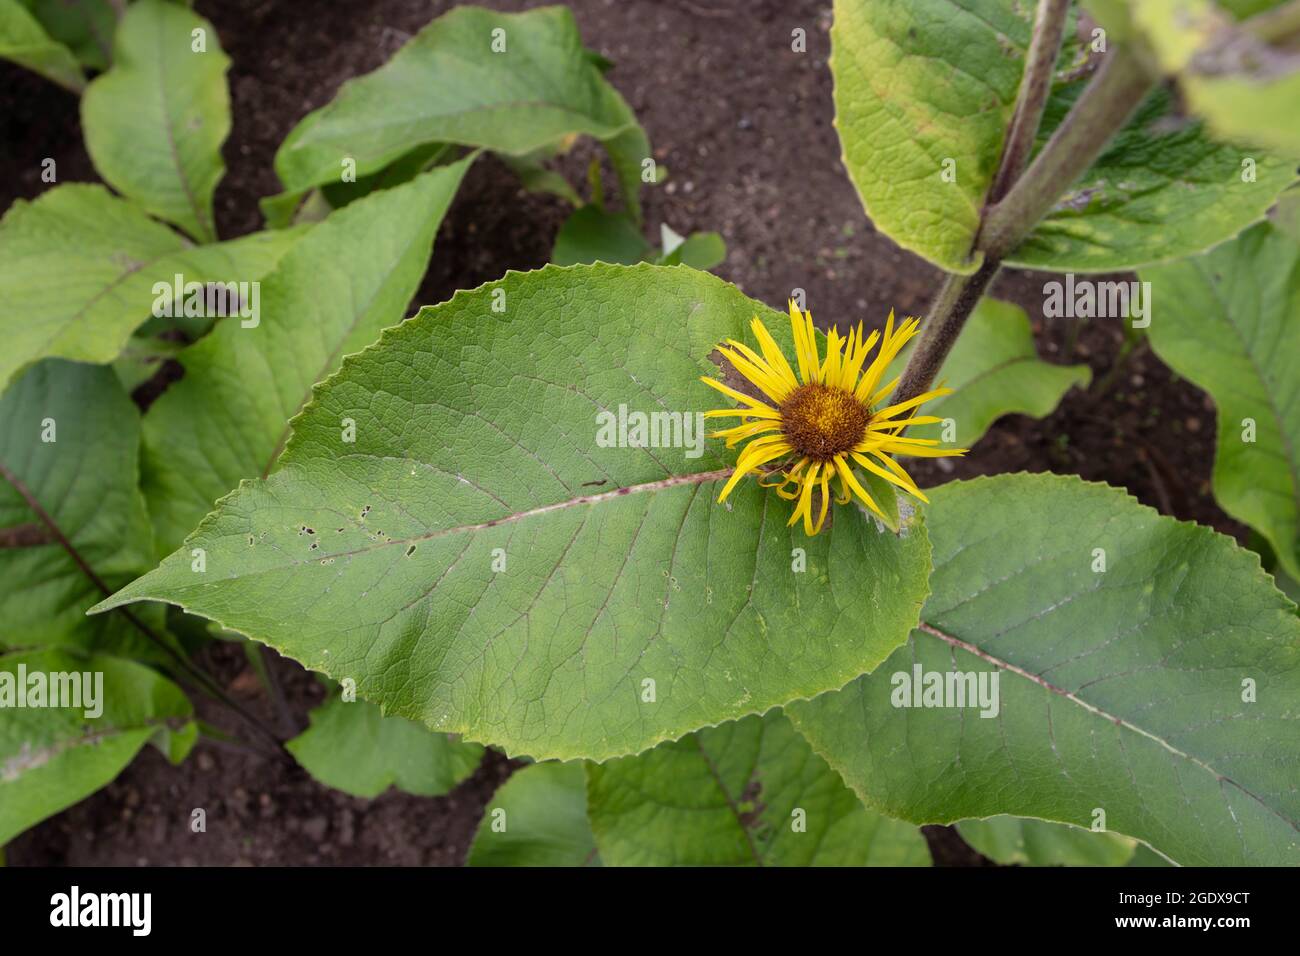 Elecampane or horse-heal or elfdock or Inula helenium plant with leaves and bright yellow ray flower head Stock Photo